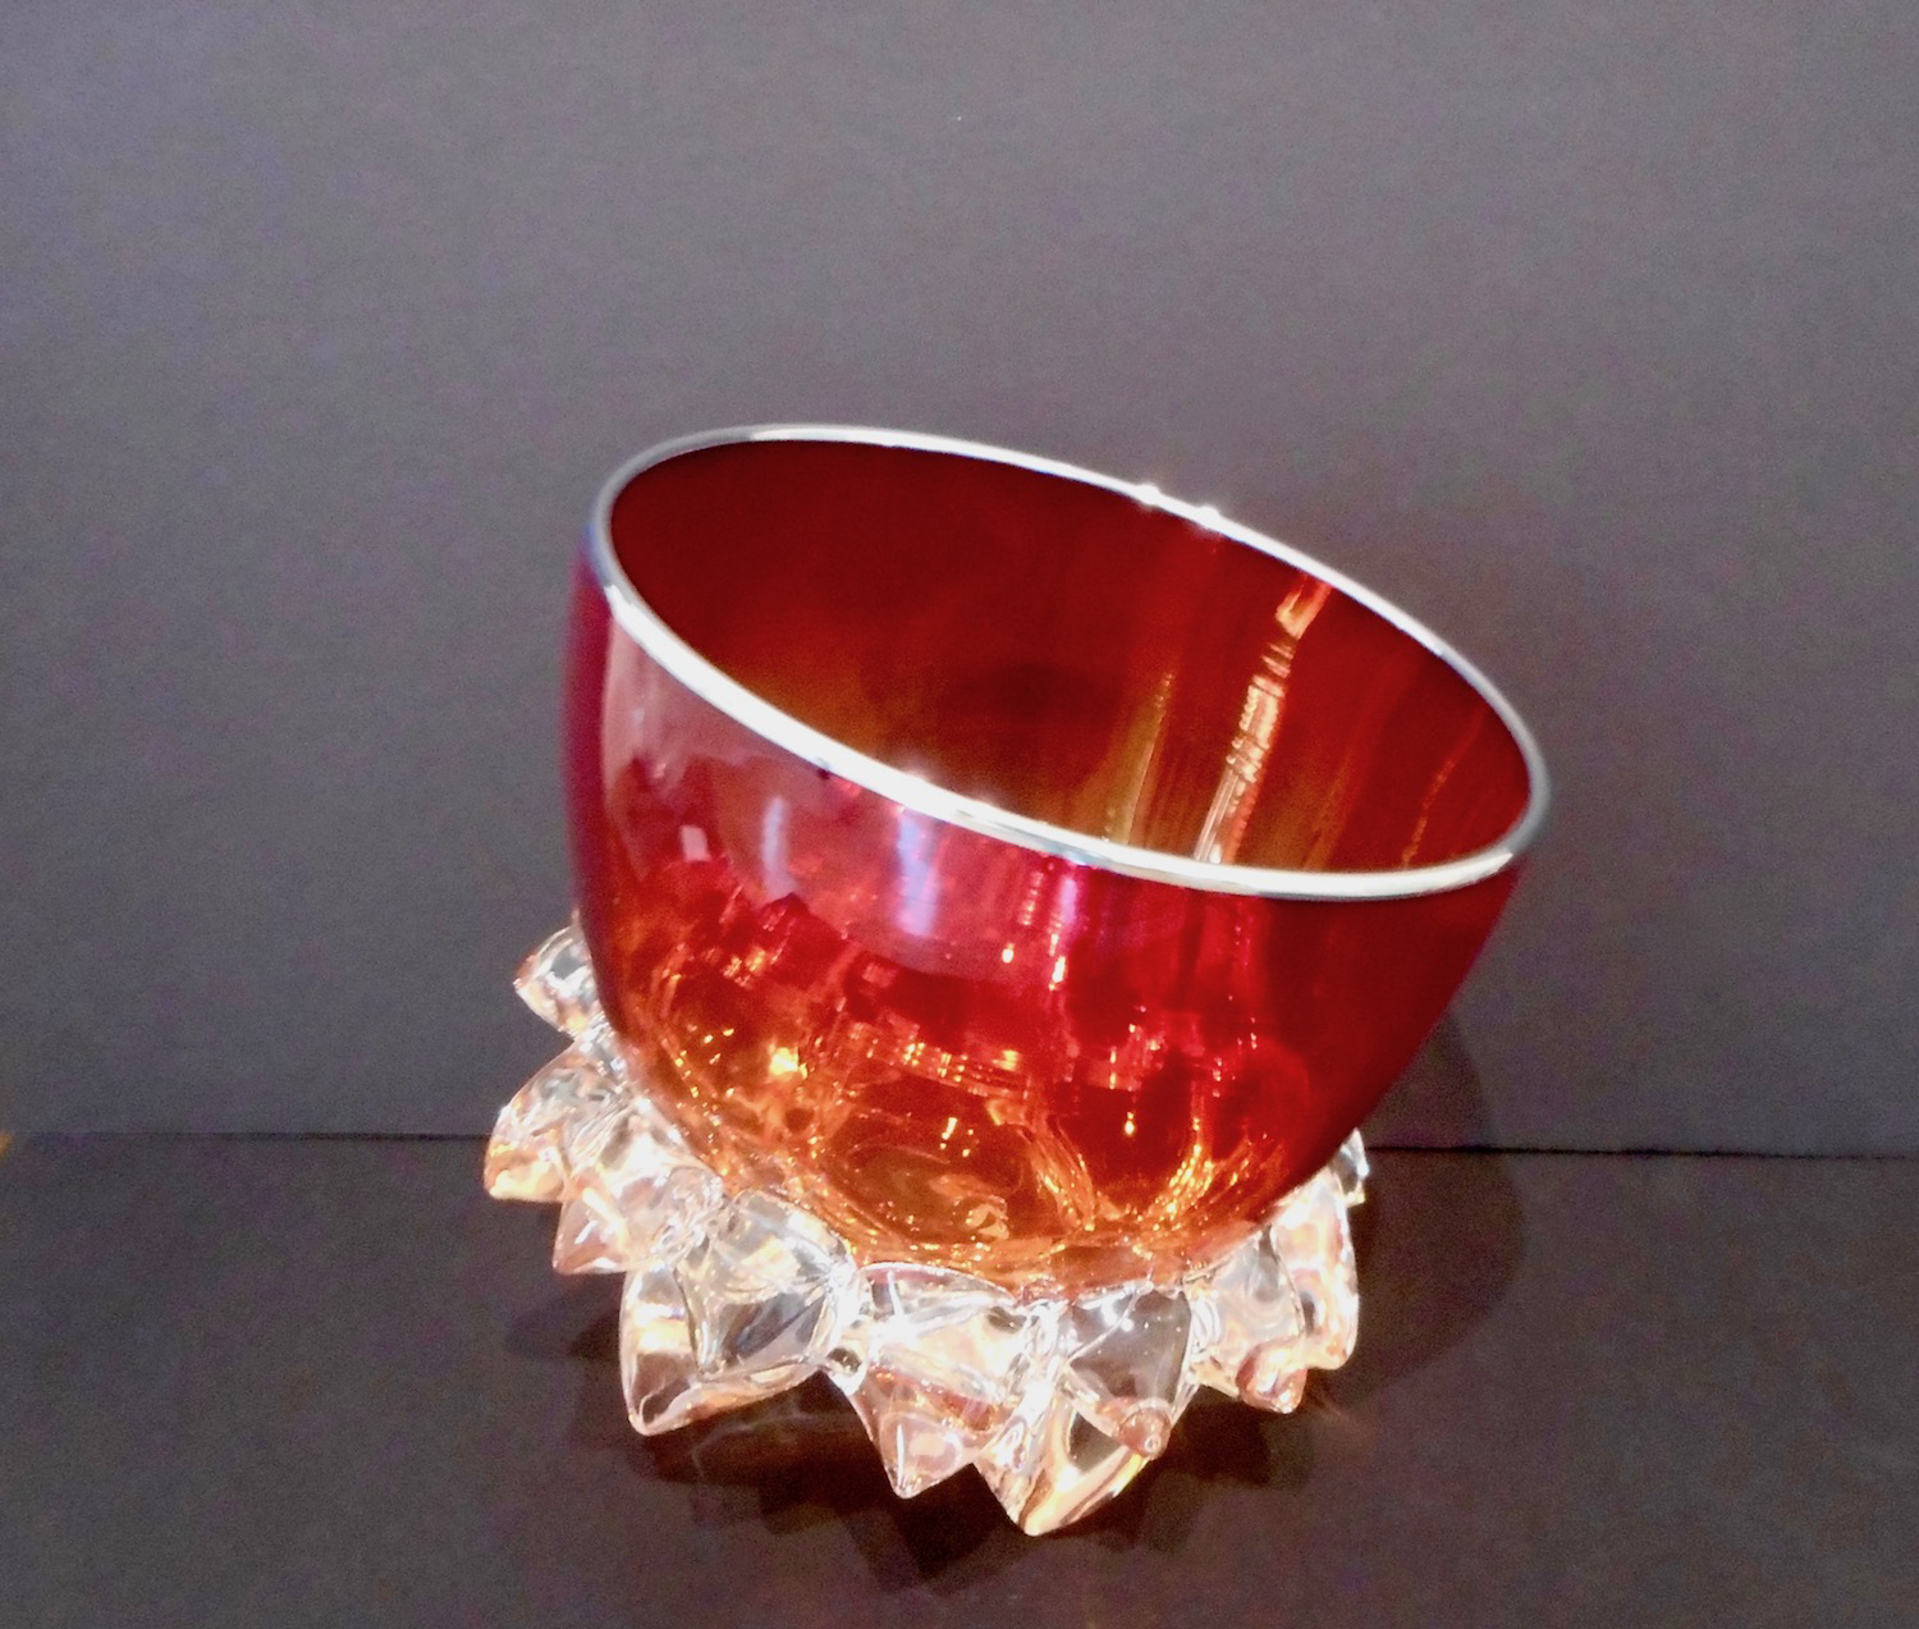 Small Thorn Vessel XVIII (Cherry Red/Silver) by Andrew Madvin